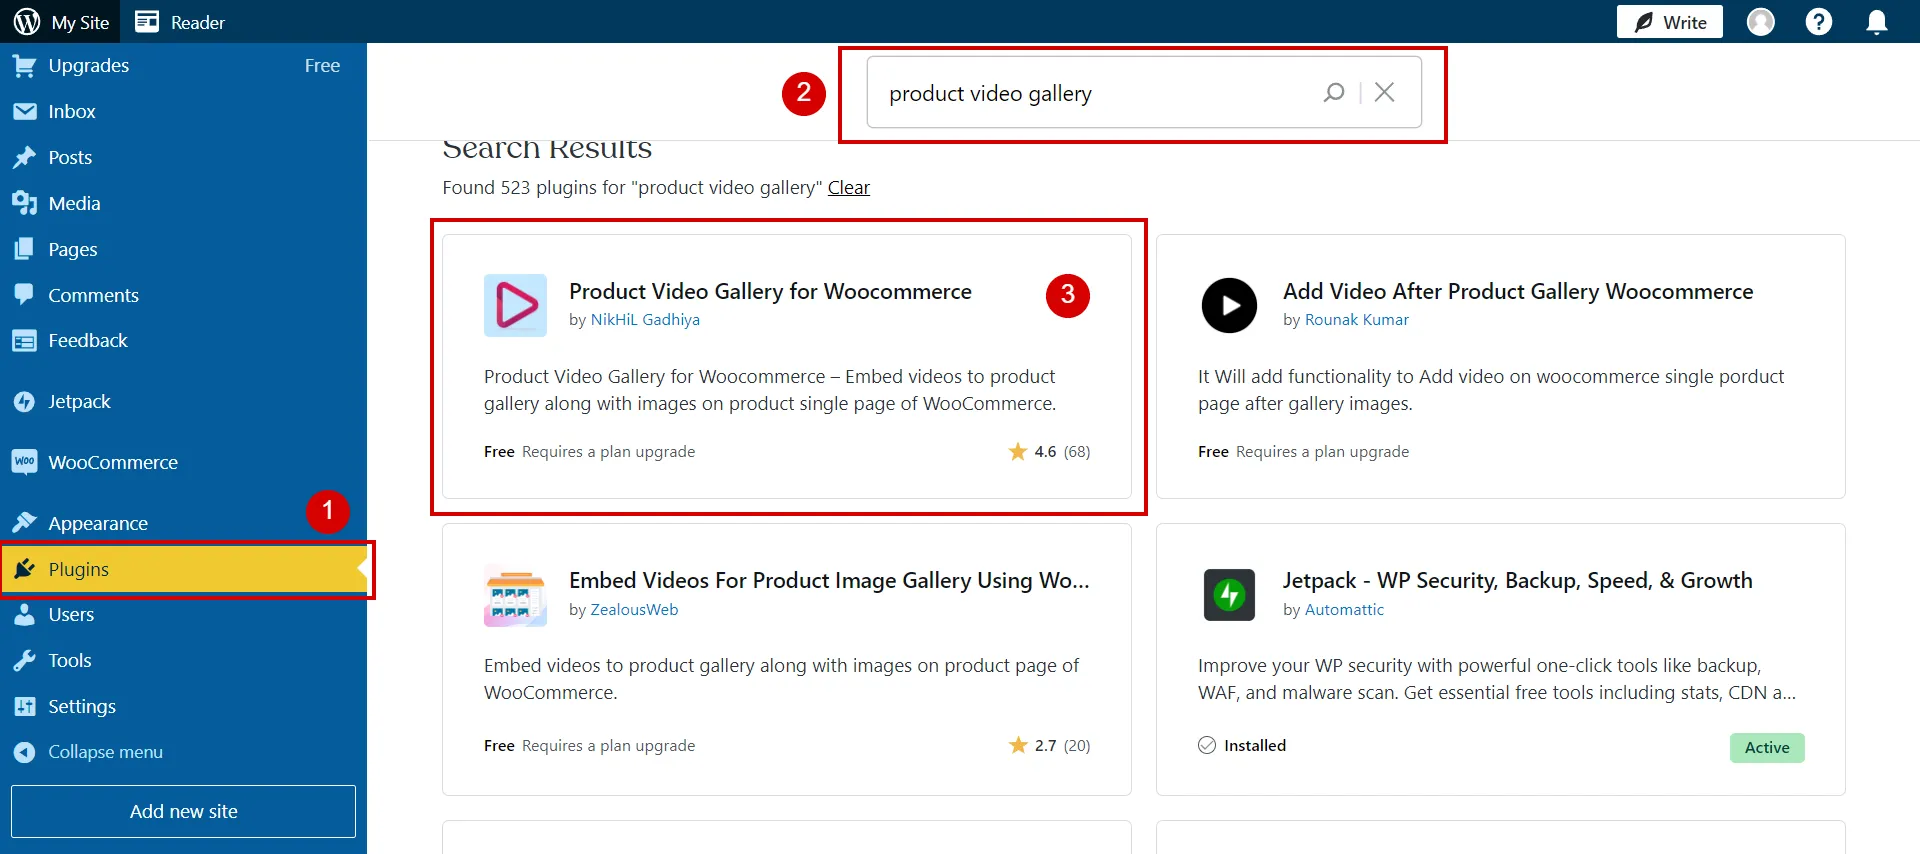 WooCommerce embed videos to product image gallery plugin